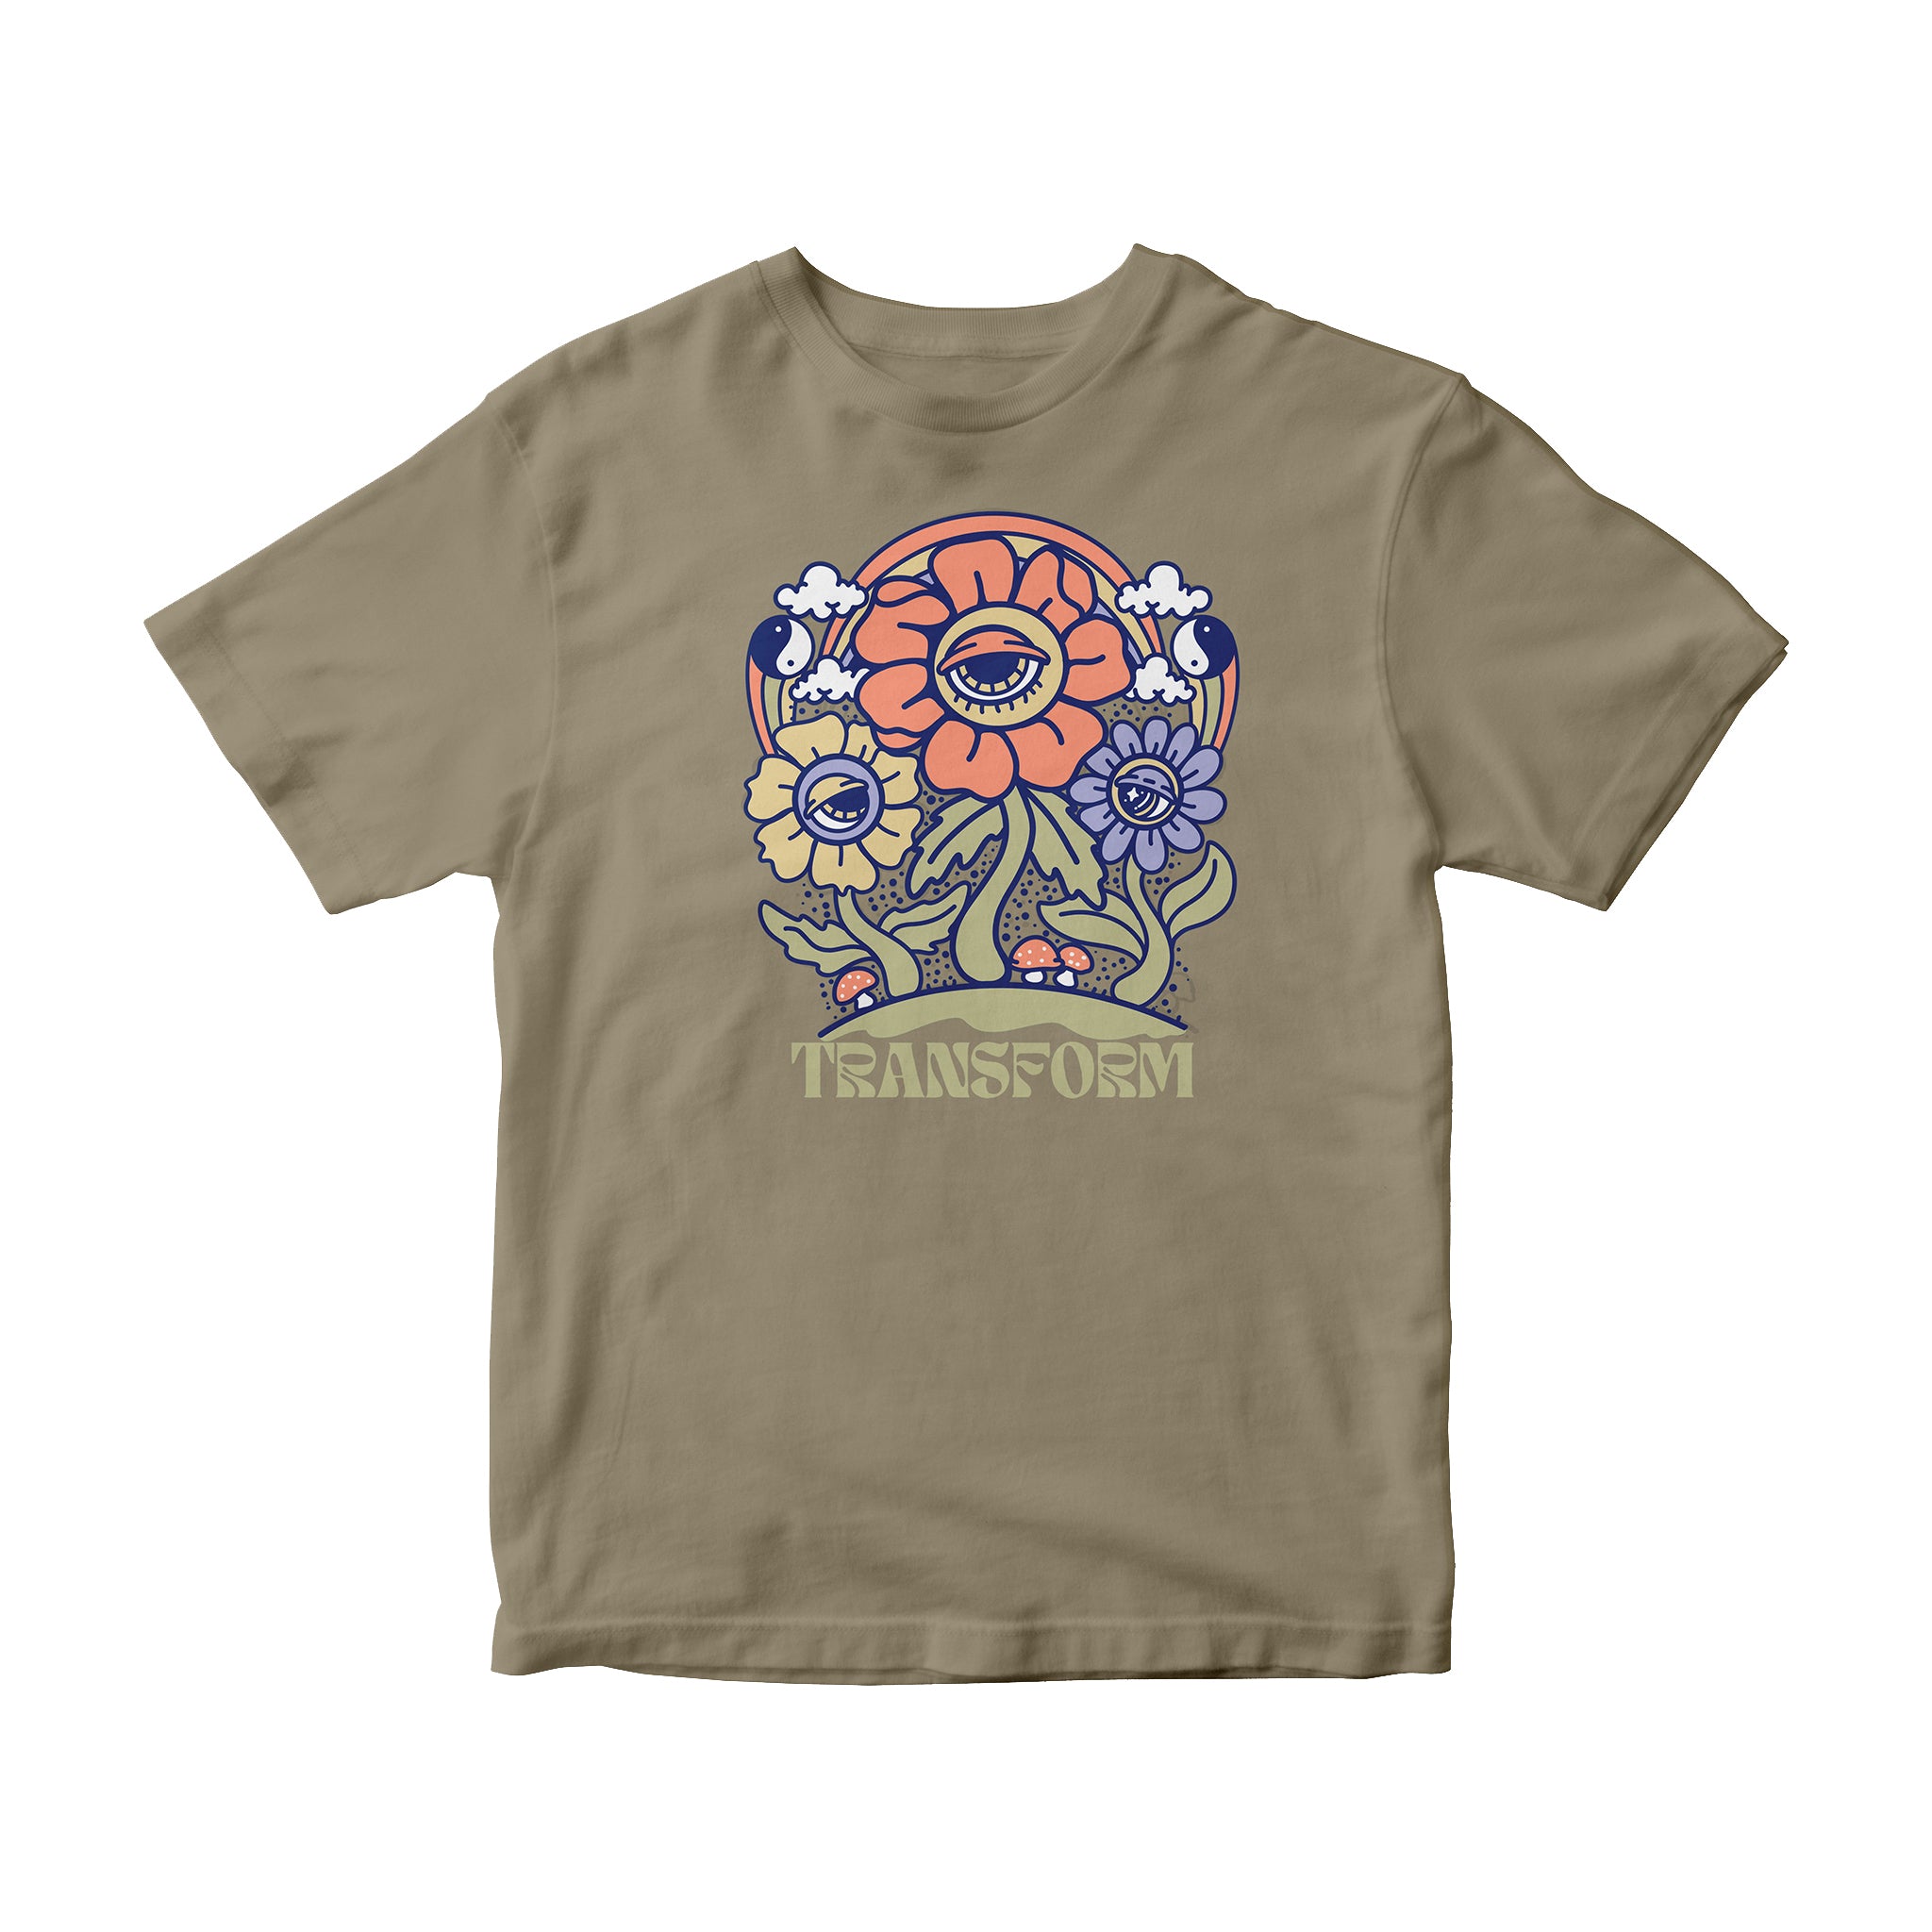 The Stoned Flower Tee Tan